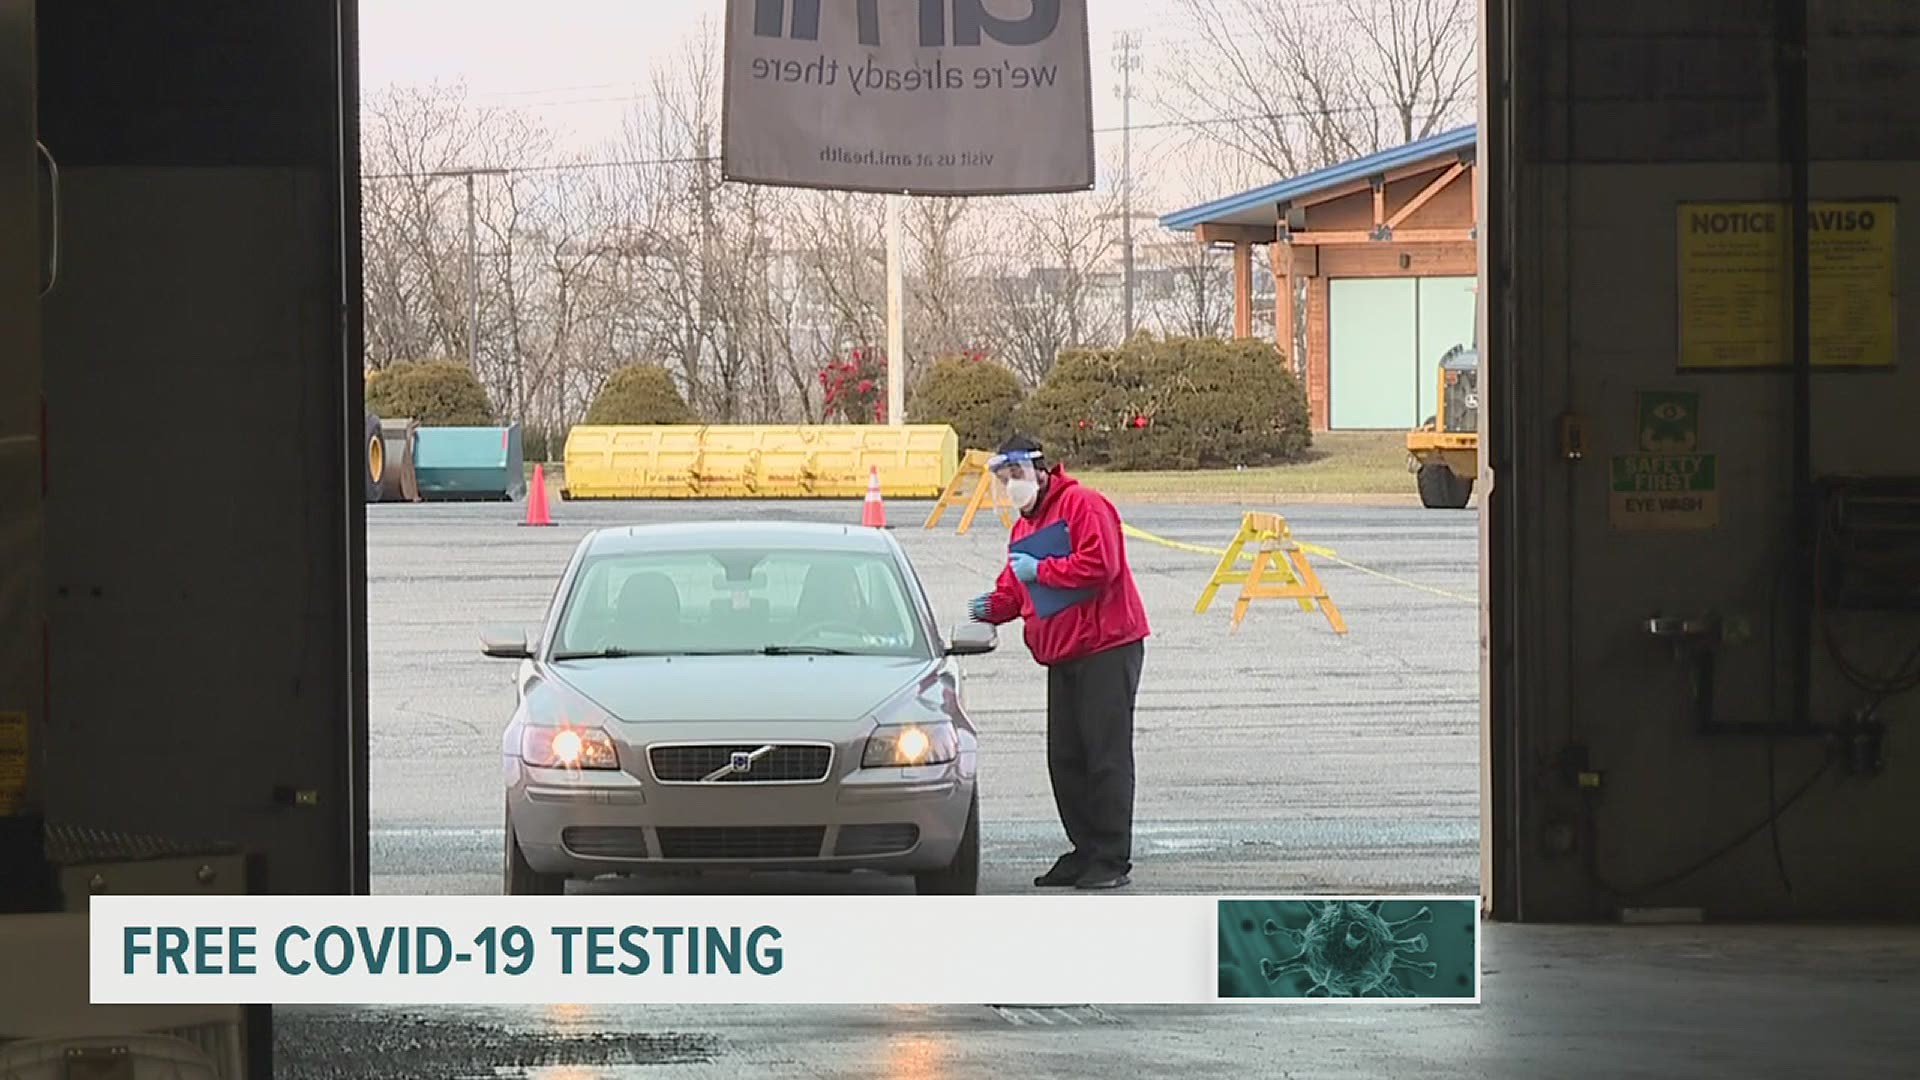 Each week a new state run COVID-19 testing site pops up, including one near Park City Mall